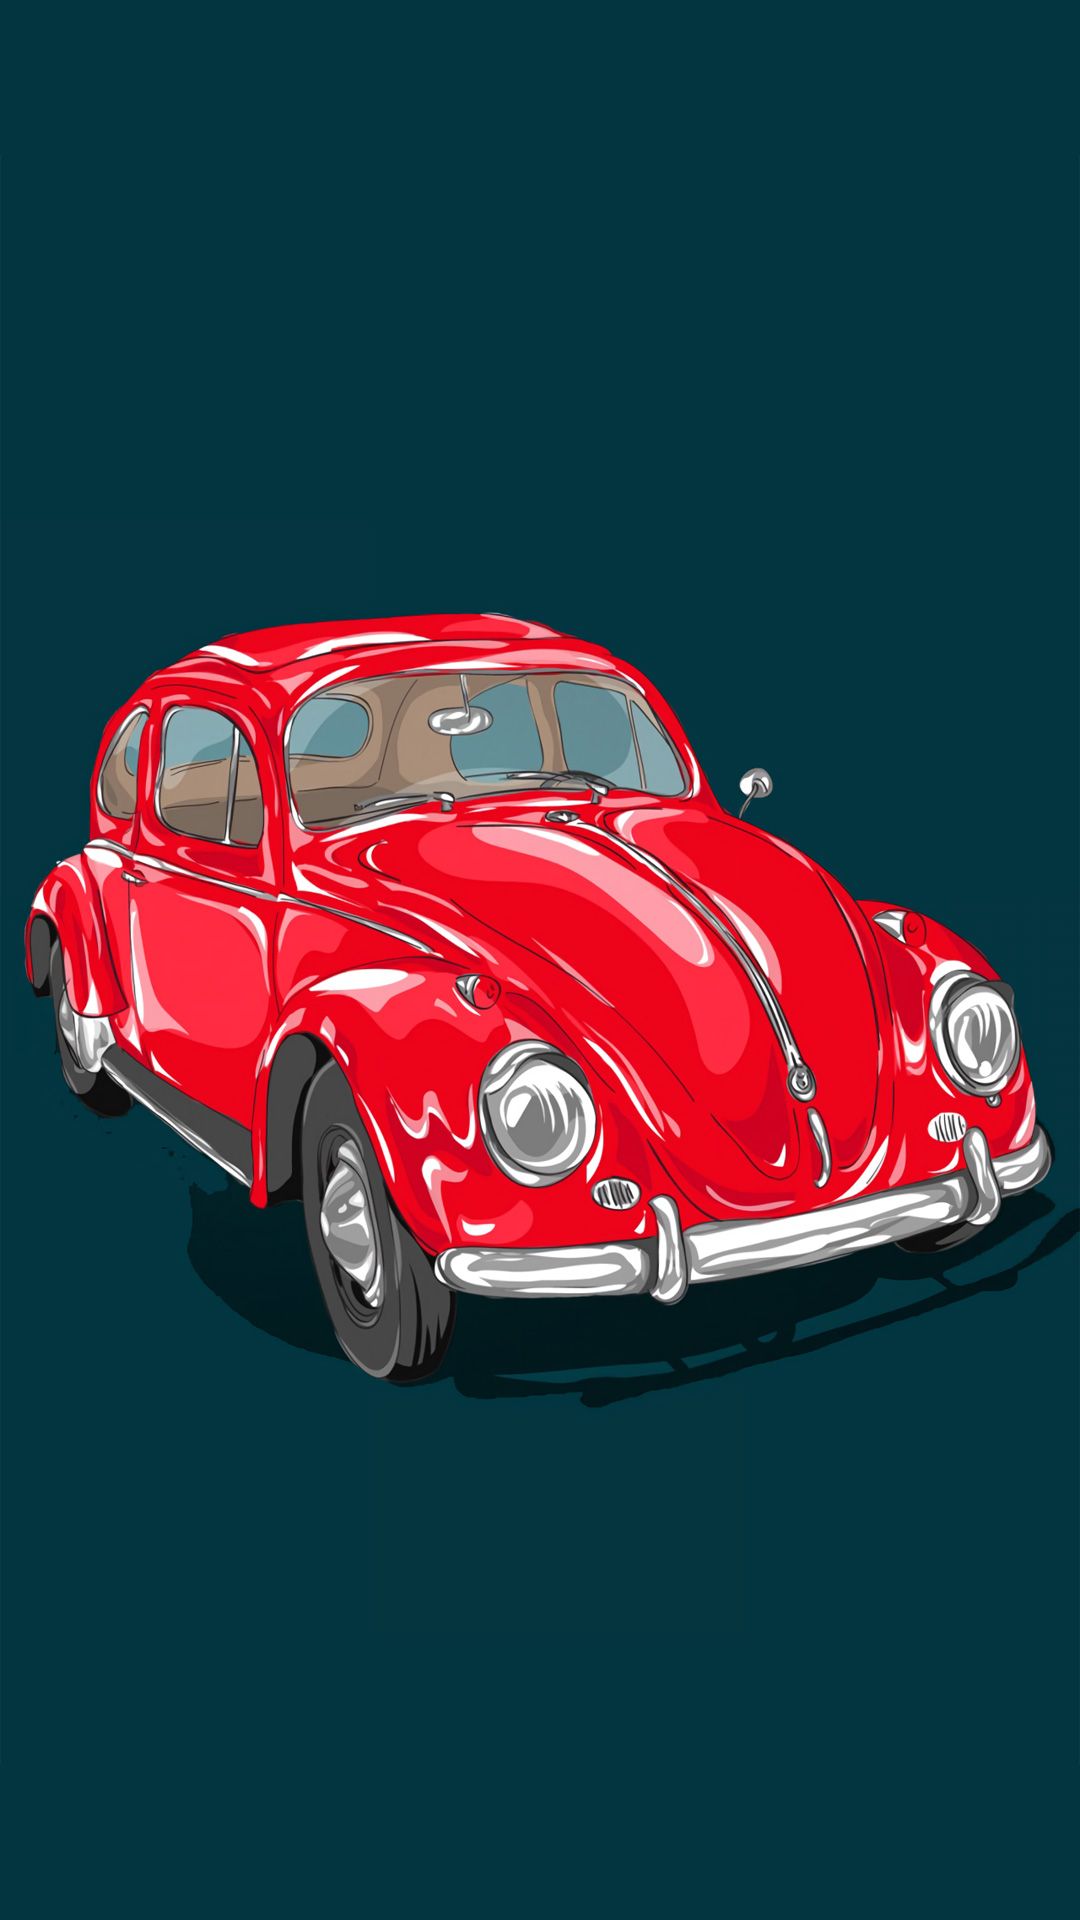 Vw Iphone Wallpapers Wallpaper Cave